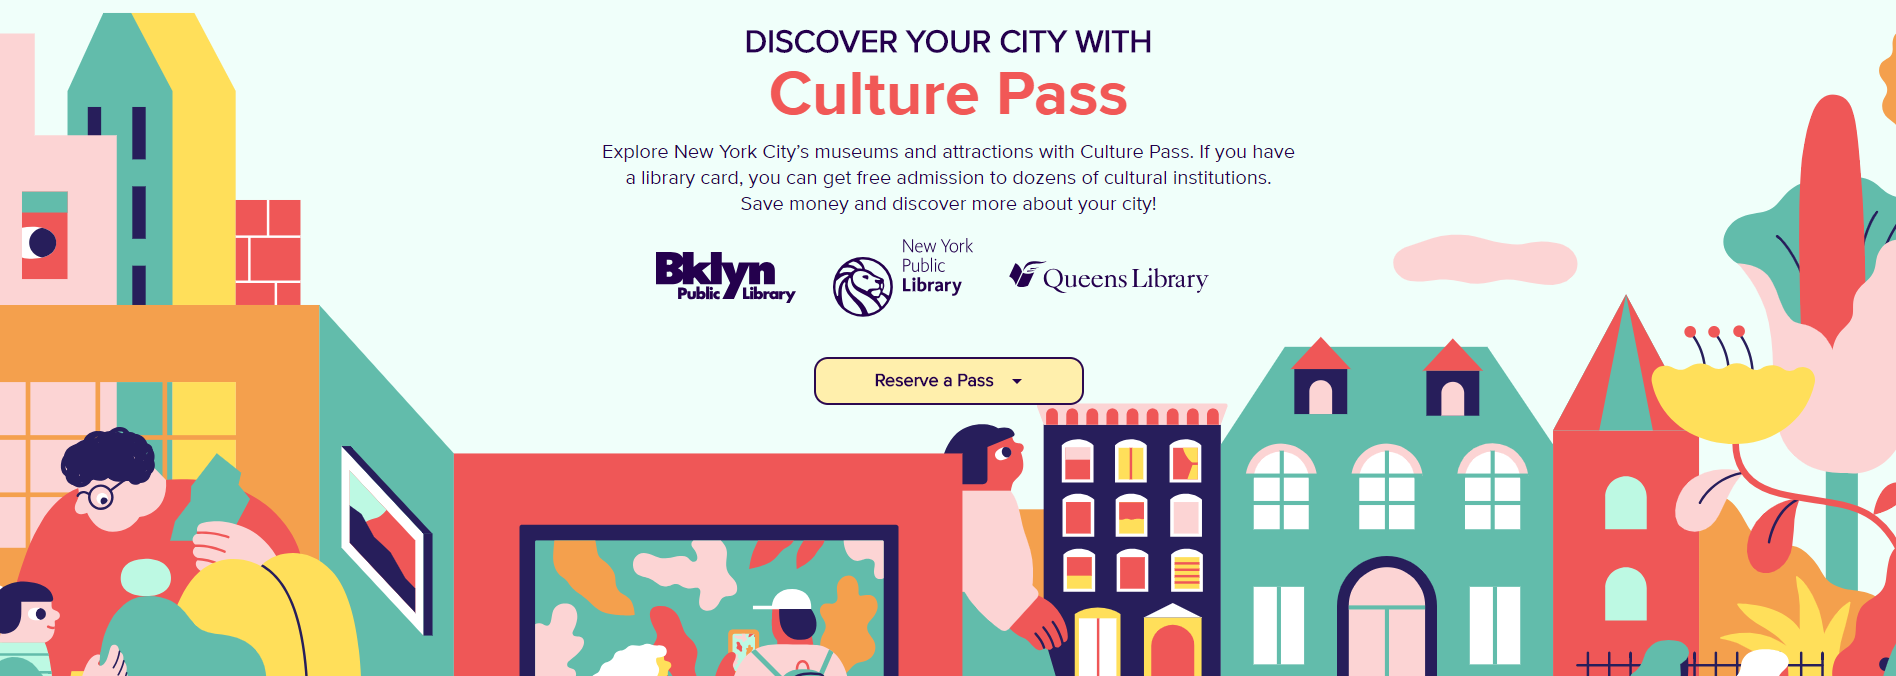 NYC Libraries Offer Free Digital Culture Pass | INFOdocket